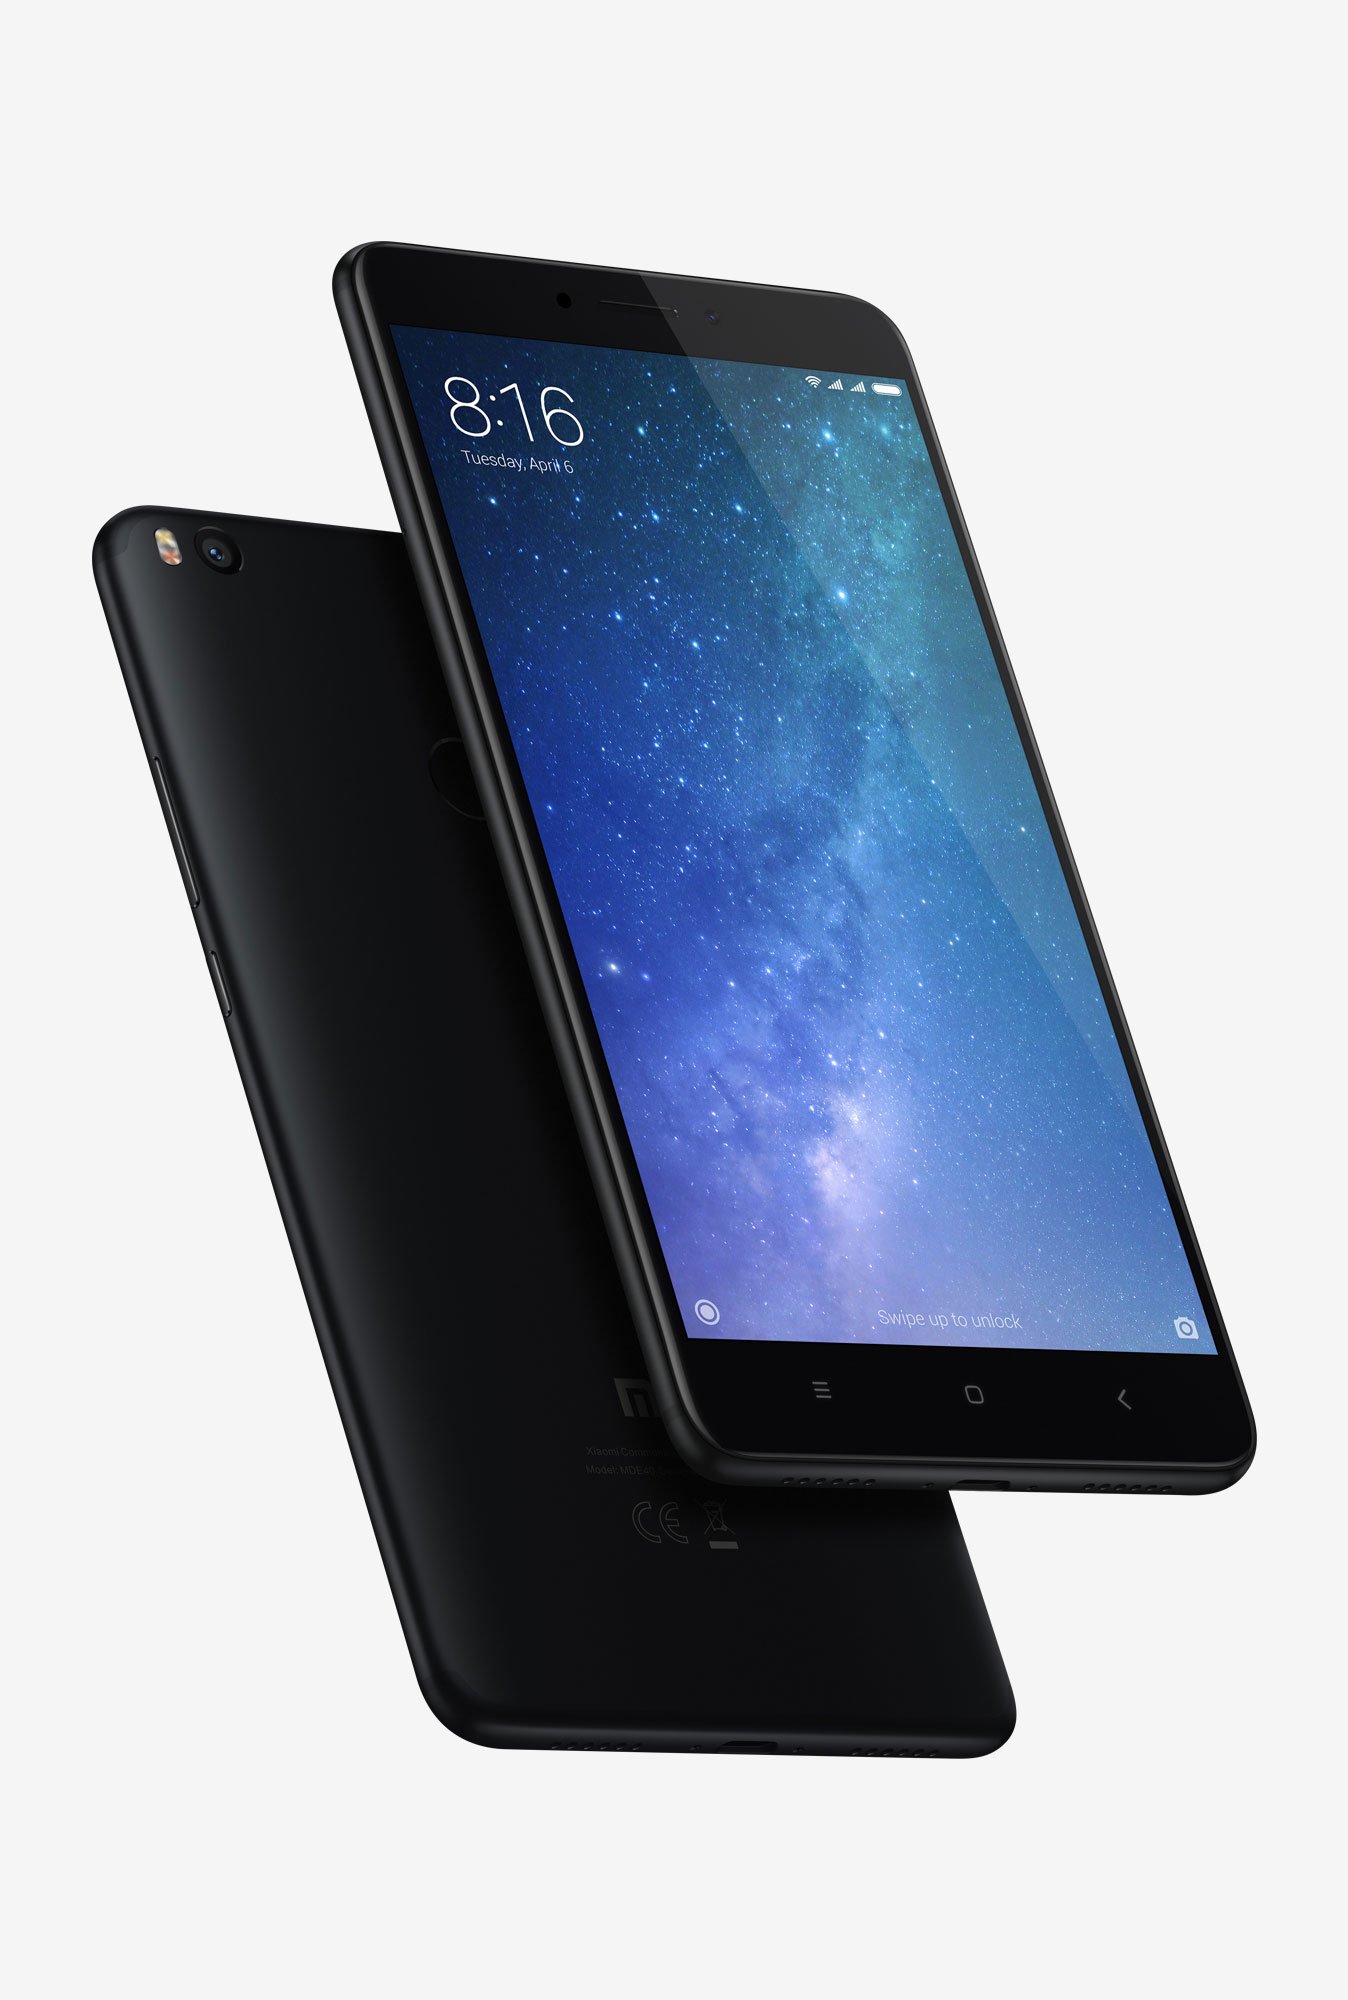 Xiaomi Mi Max 2 64GB 4GB RAM, Dual SIM 4G 5300 mAh Battery Only For Rs.13,499(HDFC Users) Or Rs.14,999